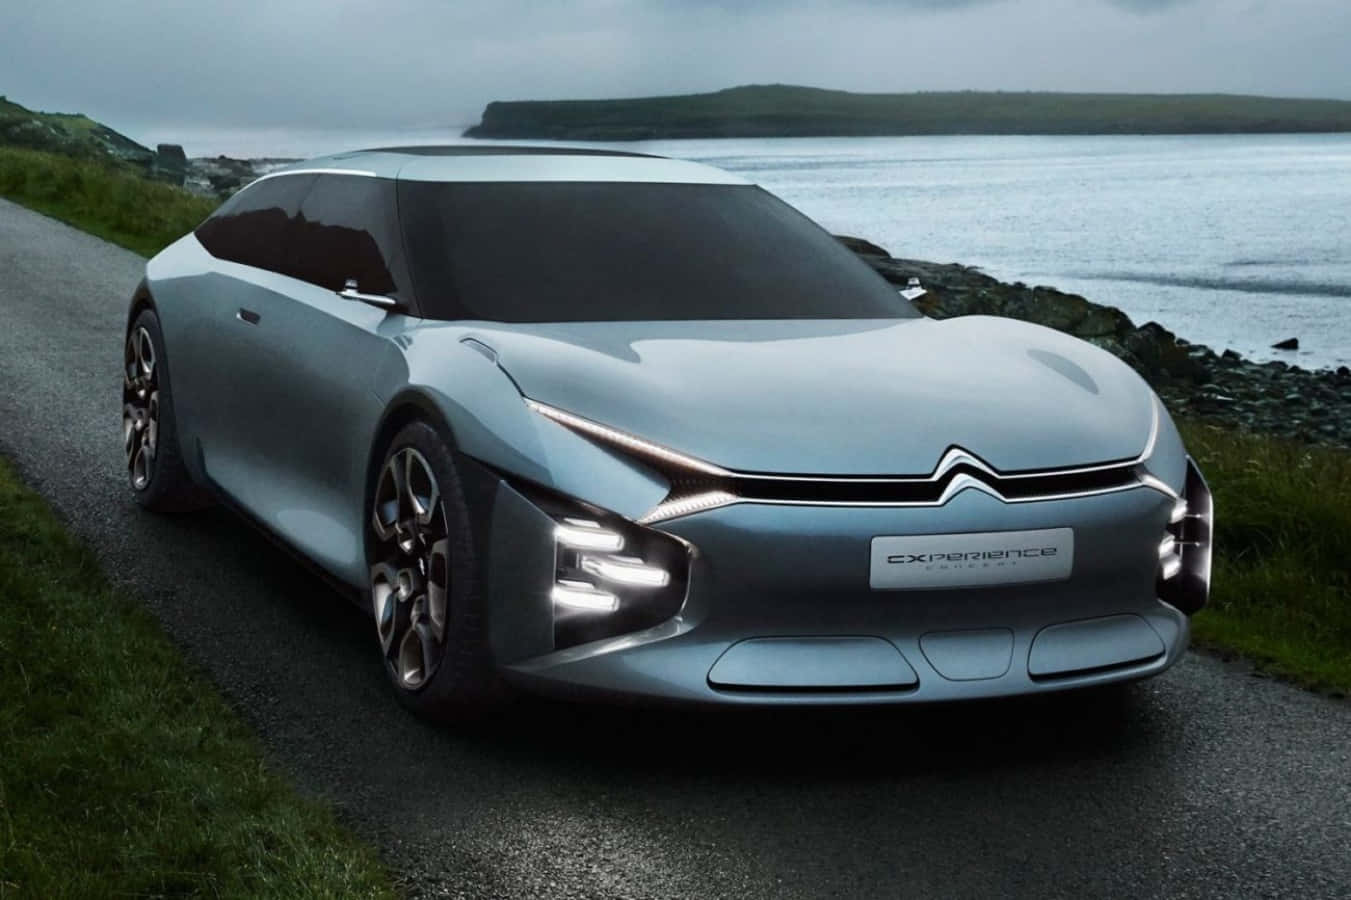 Experience luxury travel with the Citroën CXperience